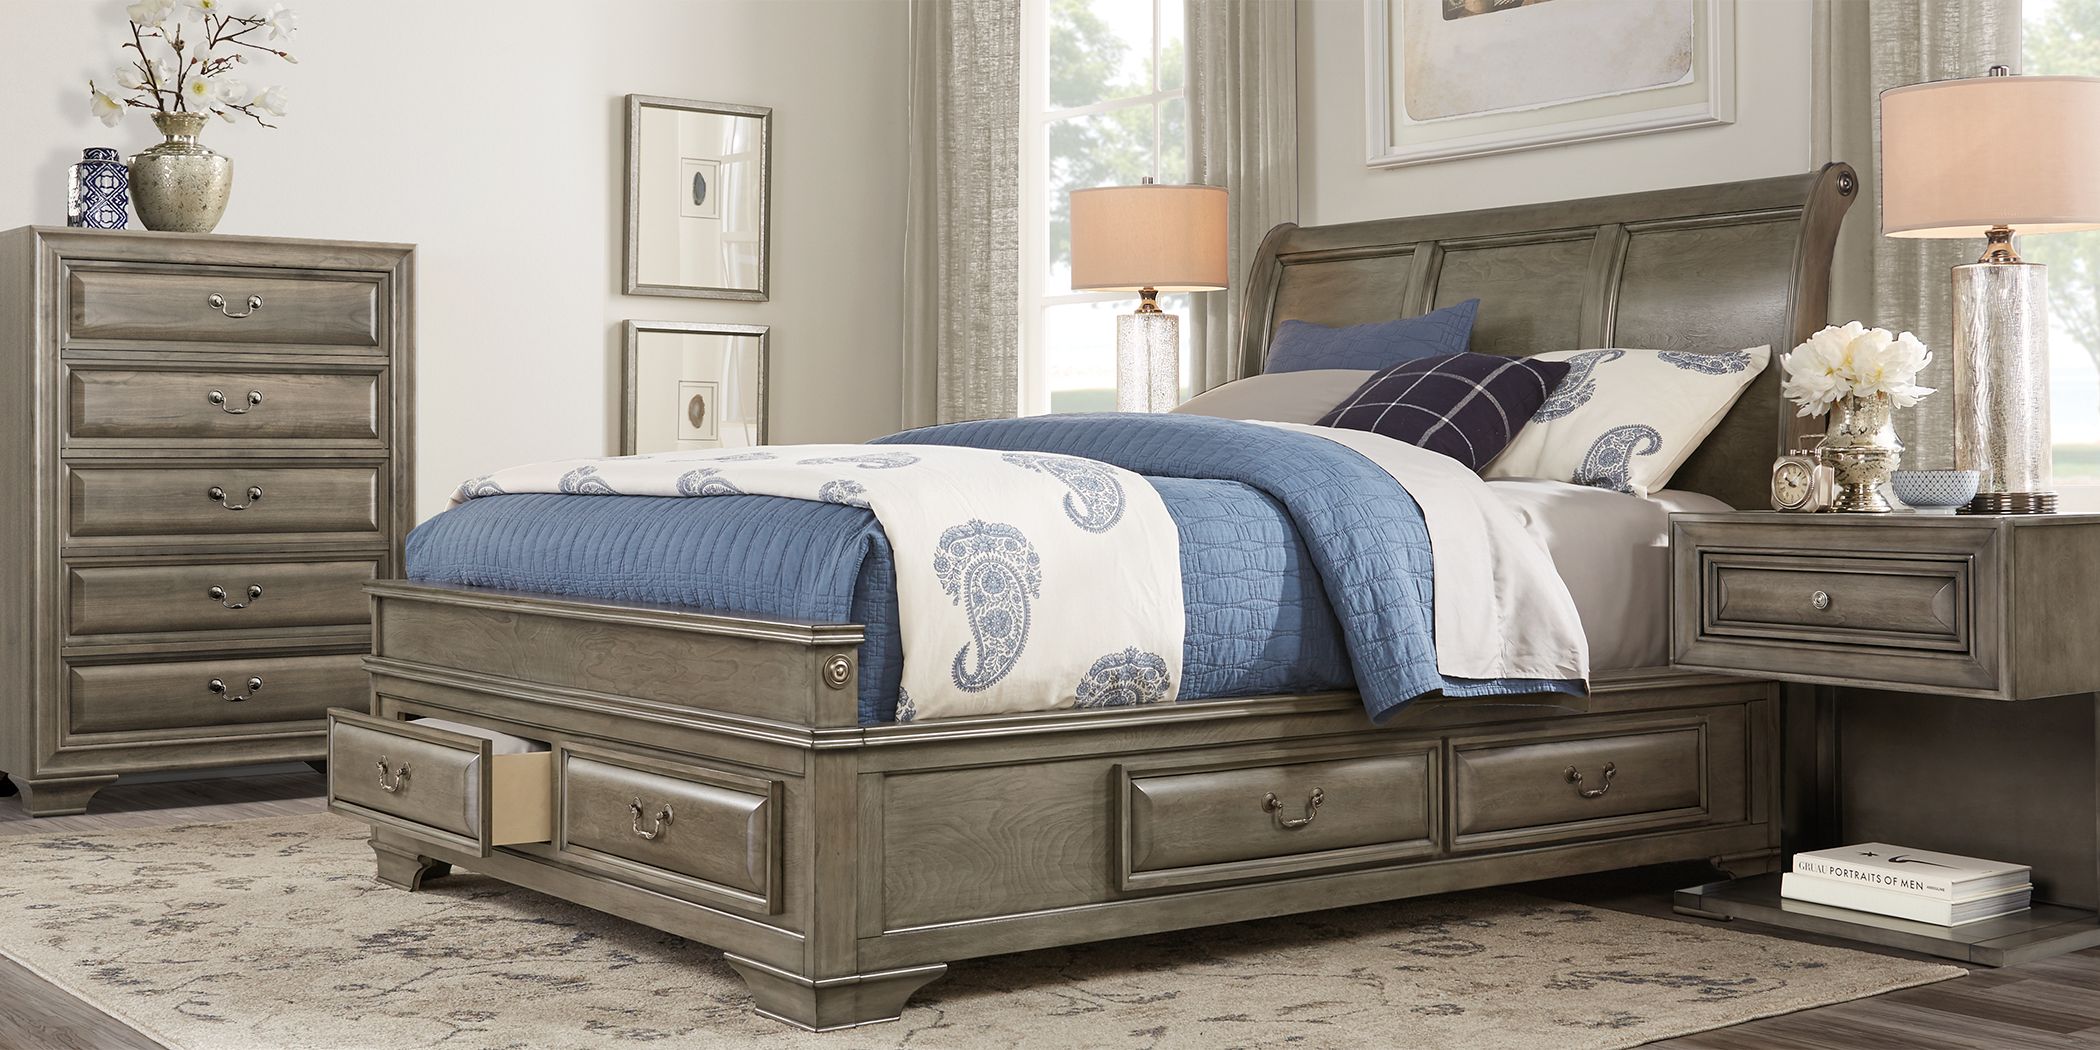 Mill Valley II Gray 5 Pc King Sleigh Bedroom with Storage